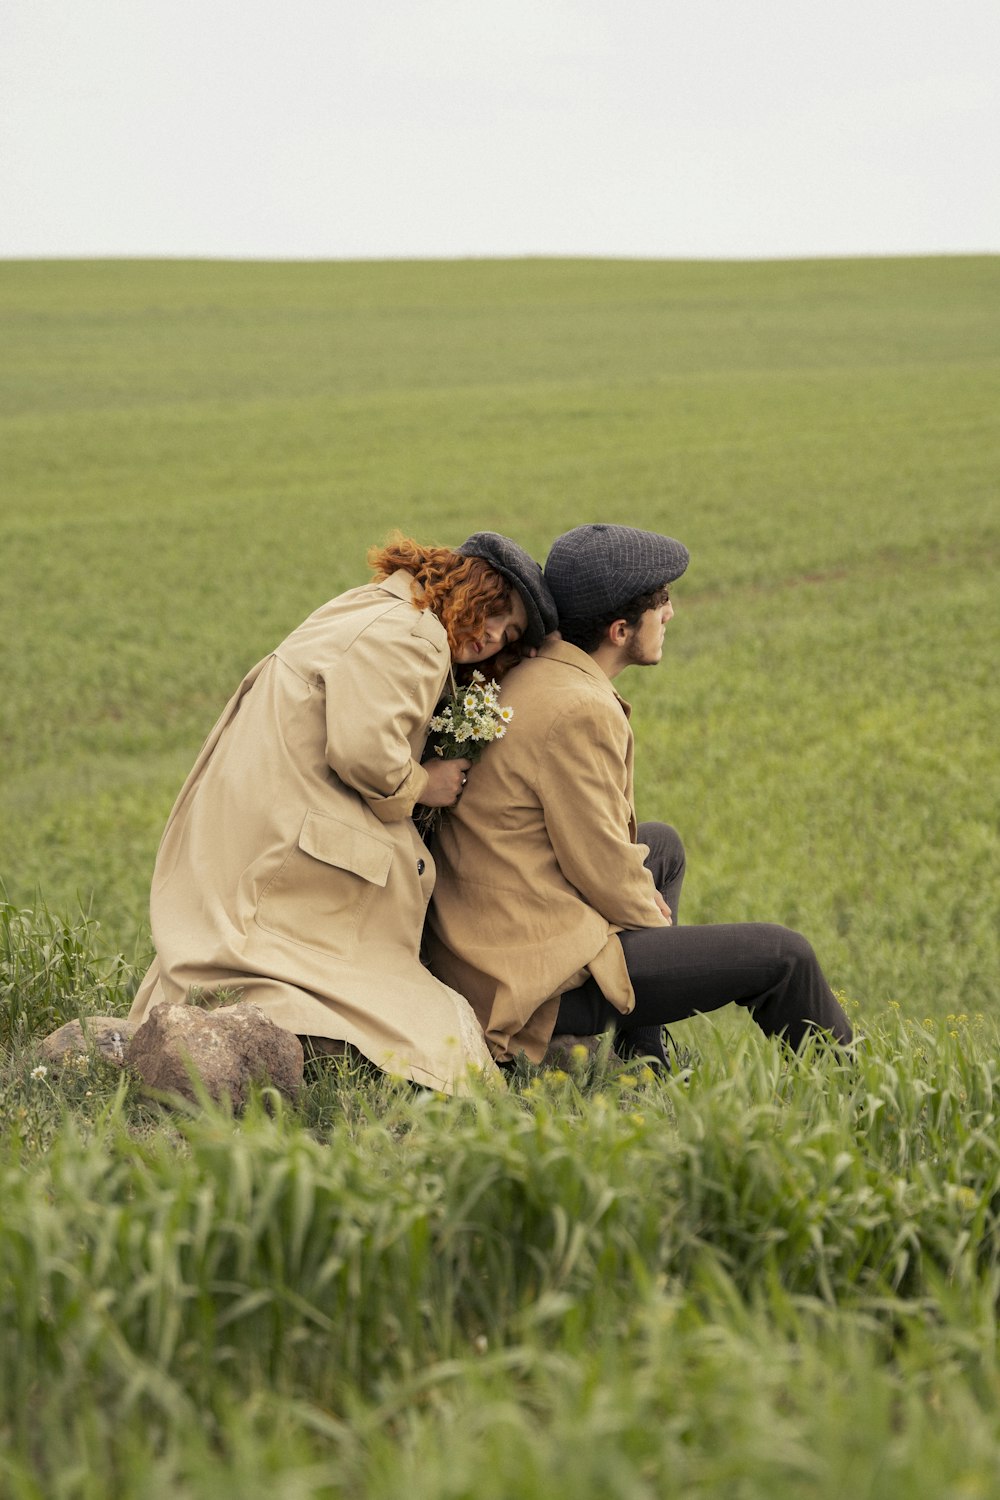 a man and woman sitting in a field of grass